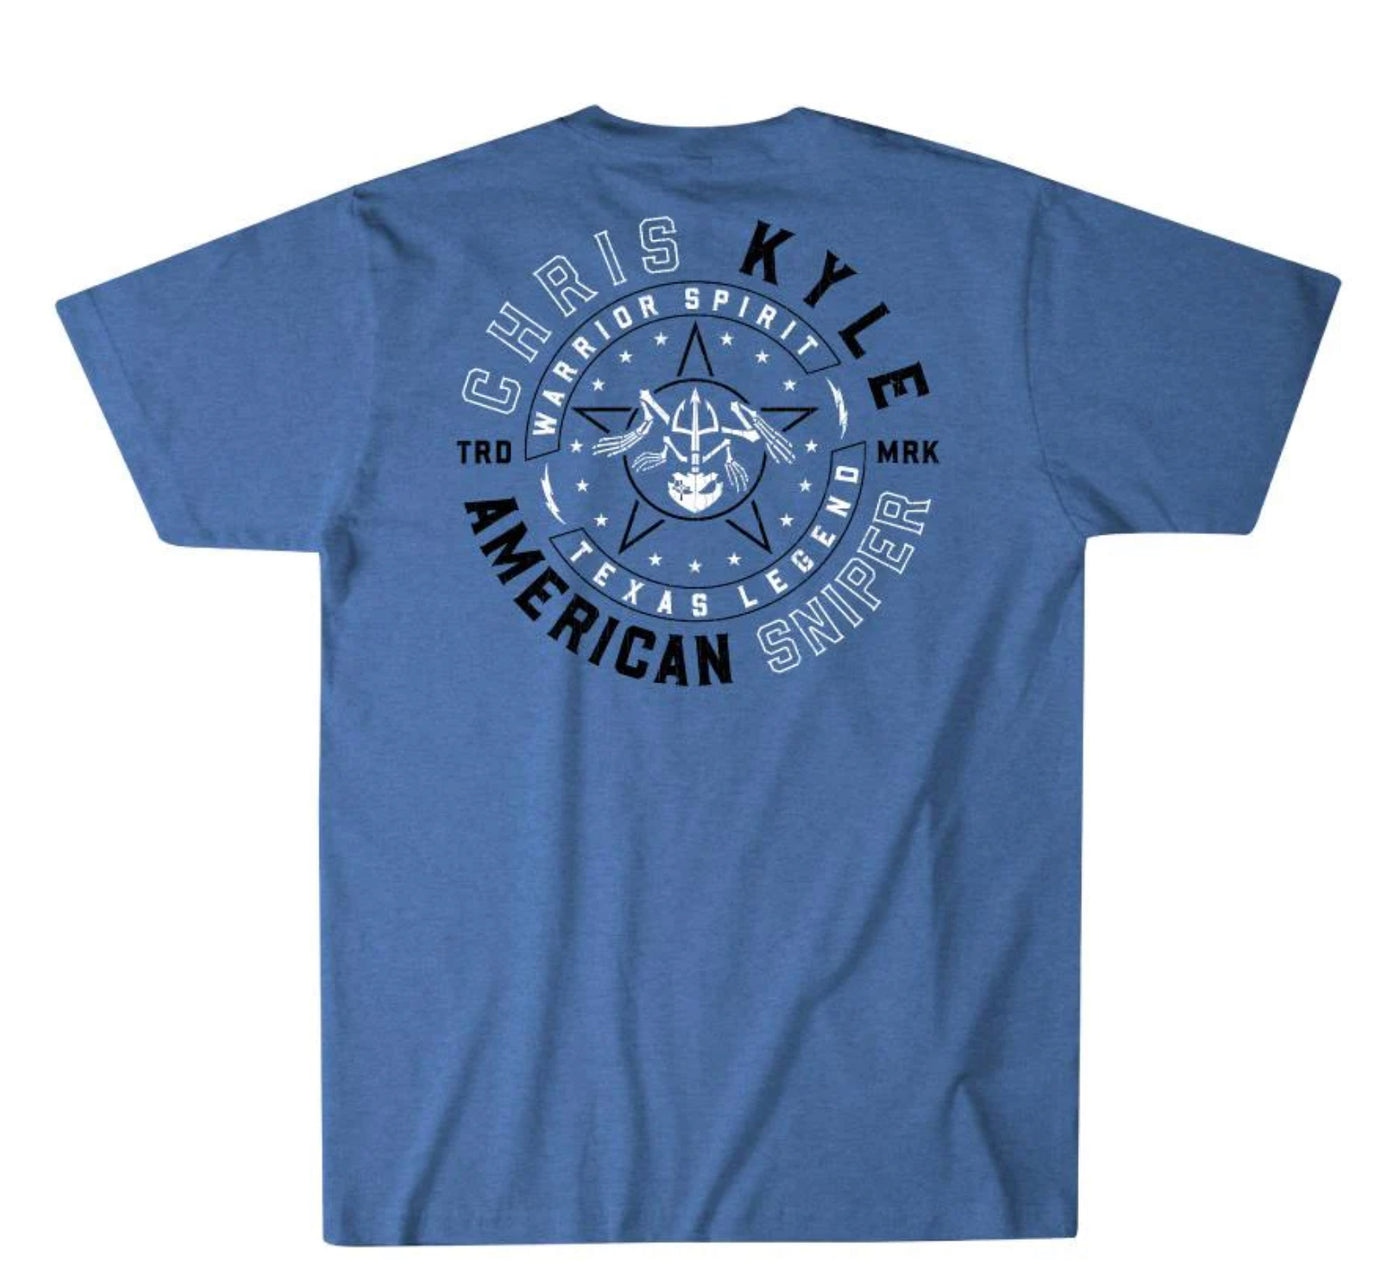 Howitzer Chris Kyle Royal Heather Circle Graphic Tee